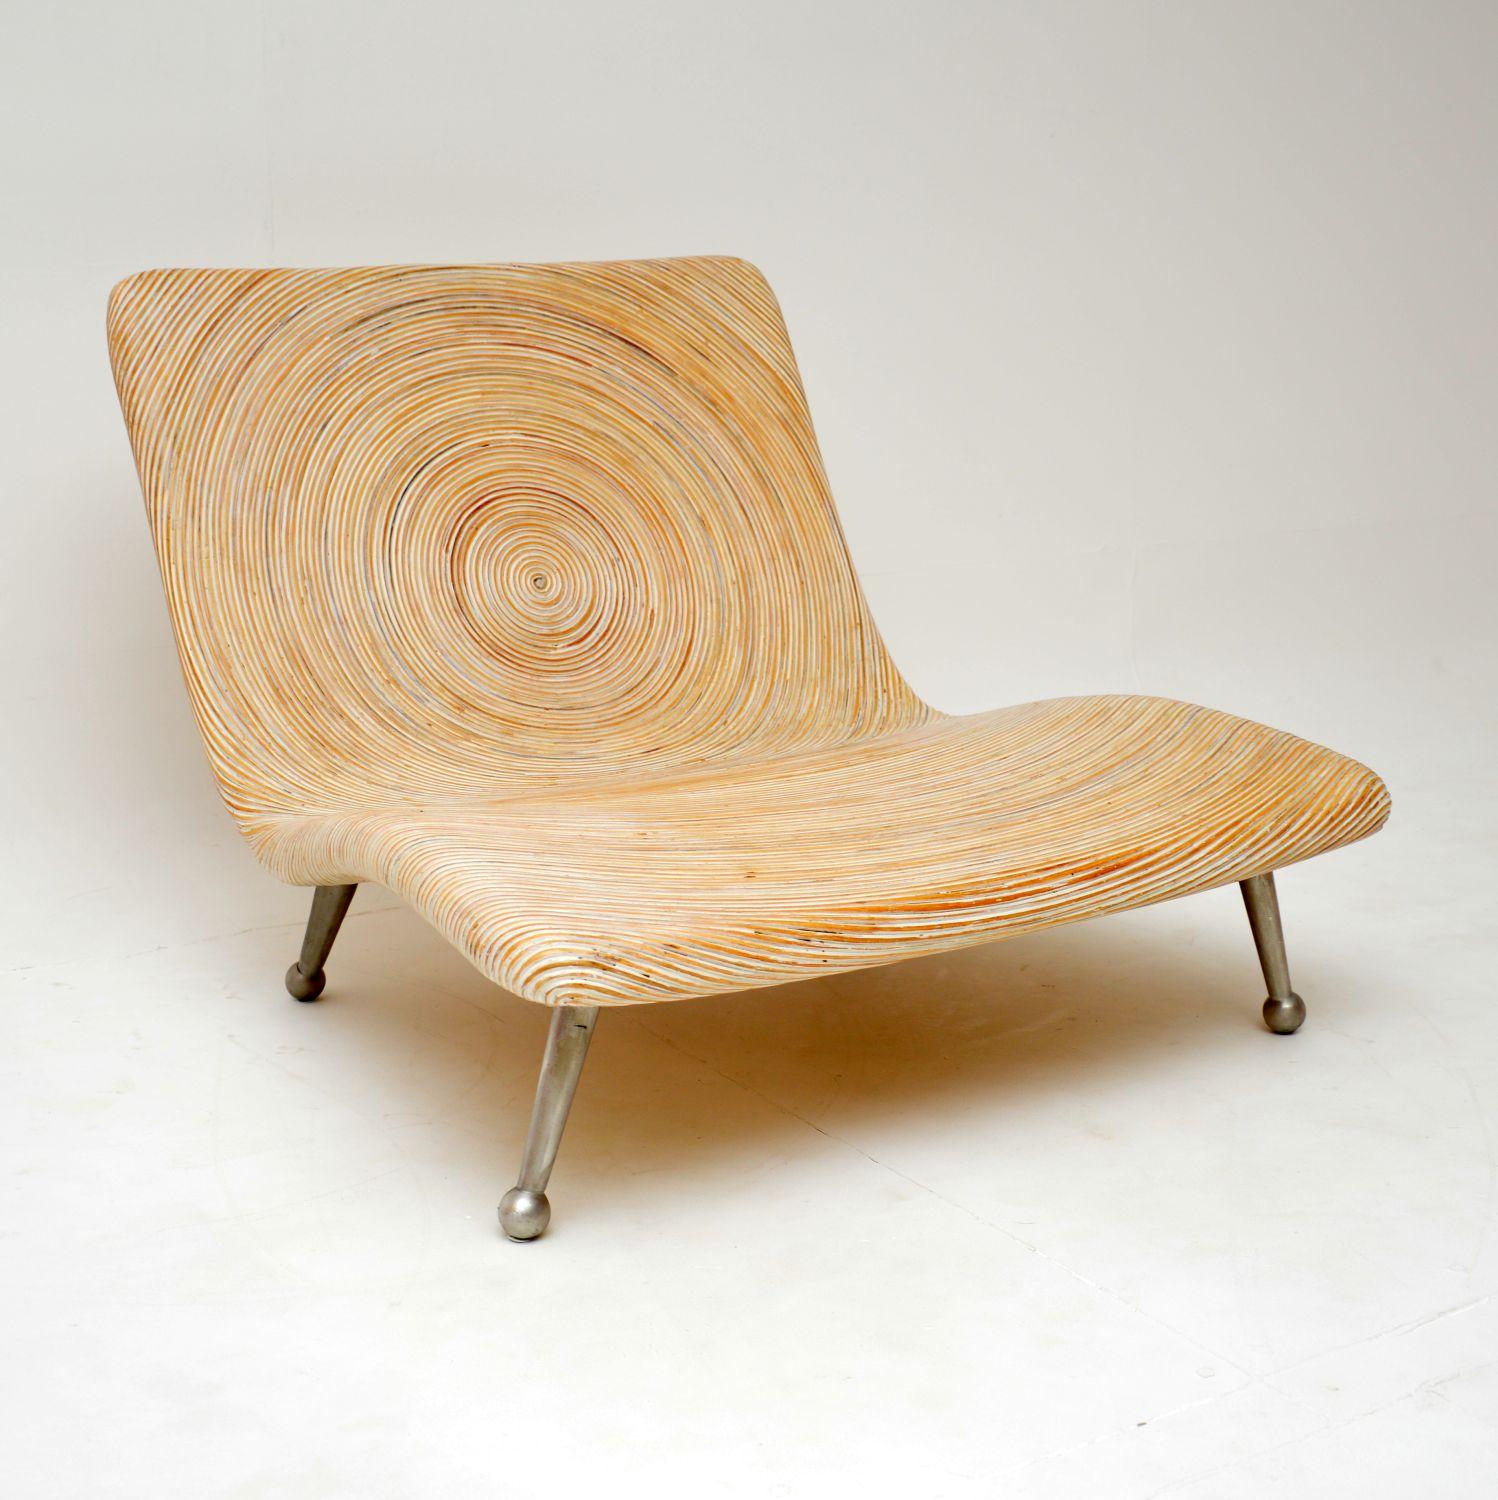 This striking and beautiful design is called the ‘coconut’ chair. It was designed by the famous Filipino designer Clayton Tugonon for Snug, and was made in the early 21st century.

This is a stylish and very eco friendly design, made from salvaged